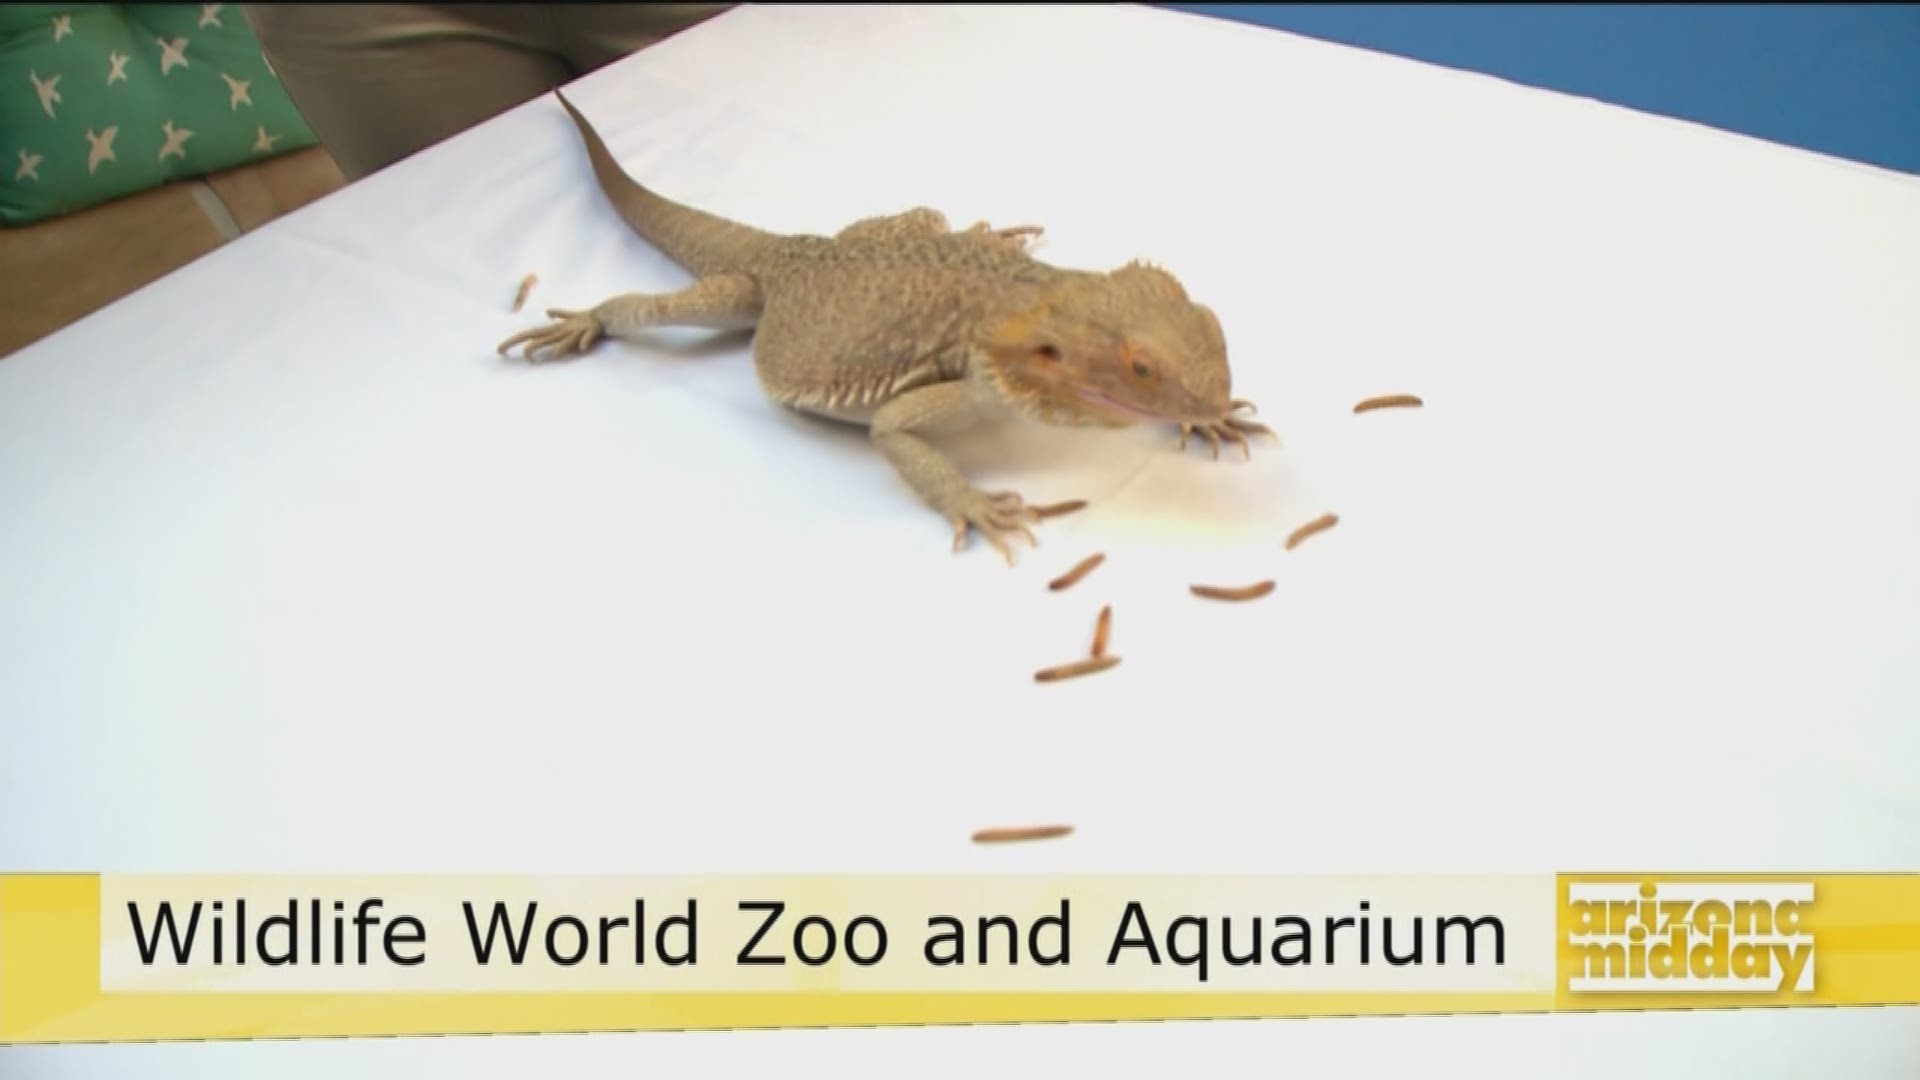 Kristy Morcom with the Wildlife World Zoo introduces us to a bearded dragon and tells us about what's happening at the zoo.